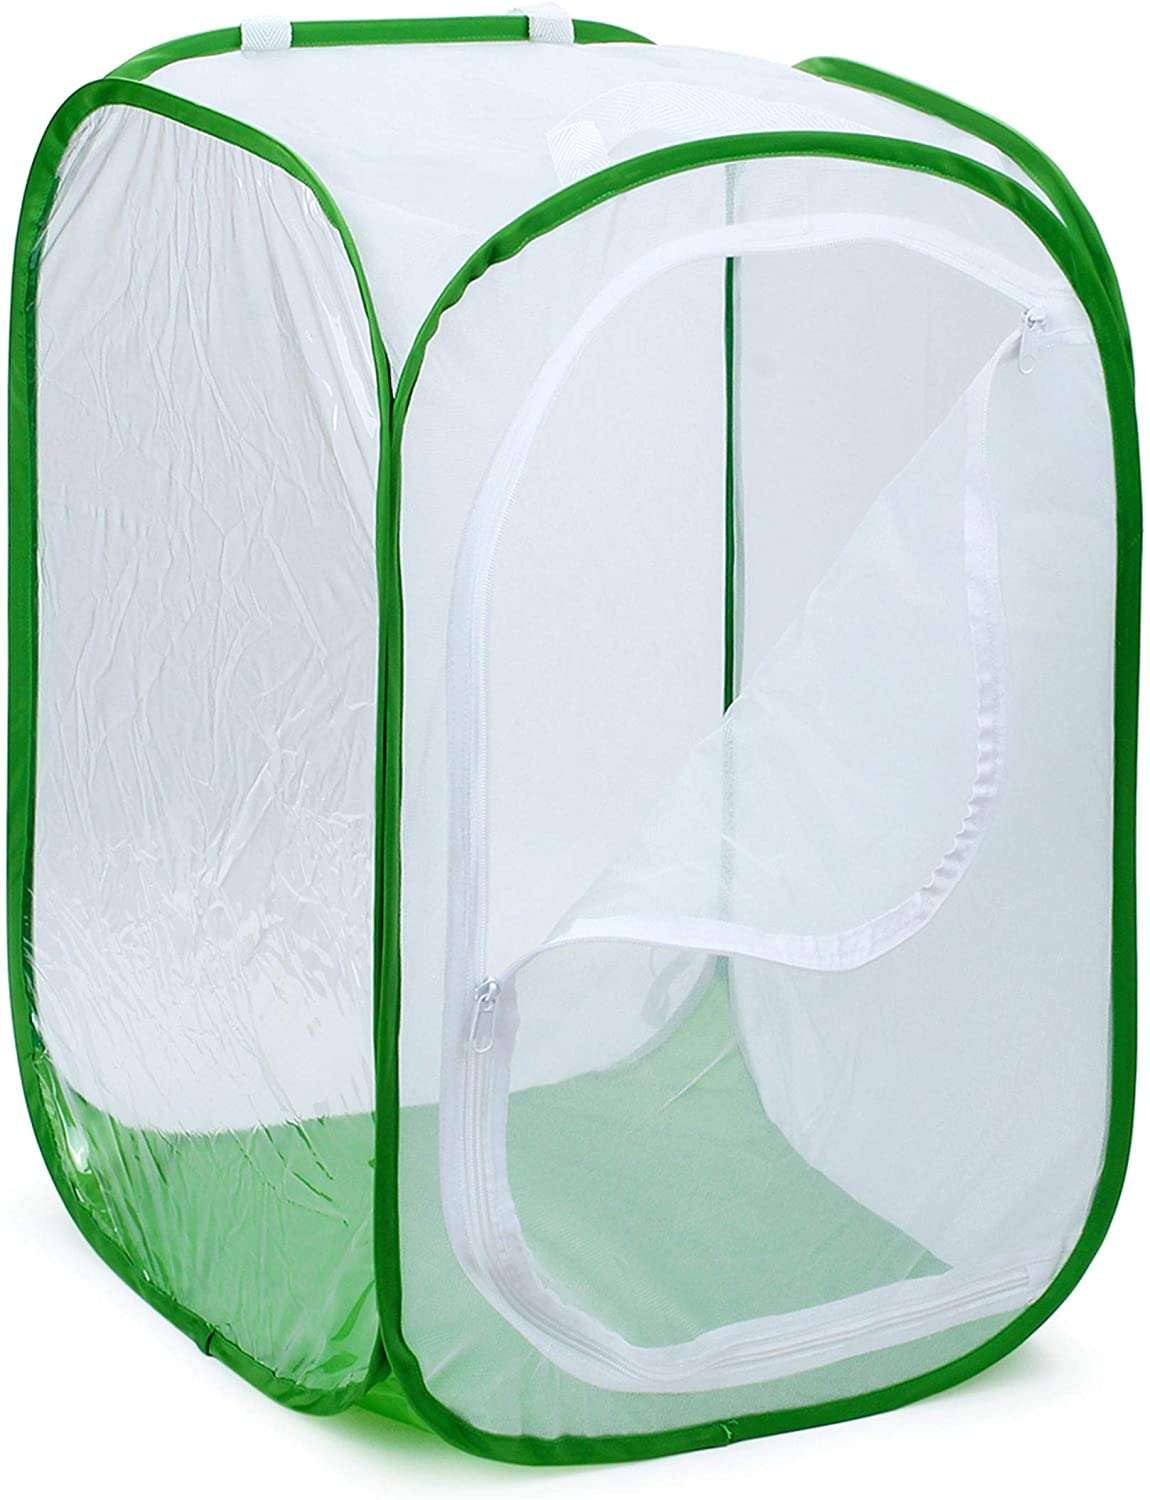 36" Large Collapsible Insect Mesh Cage Terrarium Pop-up 24 x 24 x 36 Inches - USMANTIS